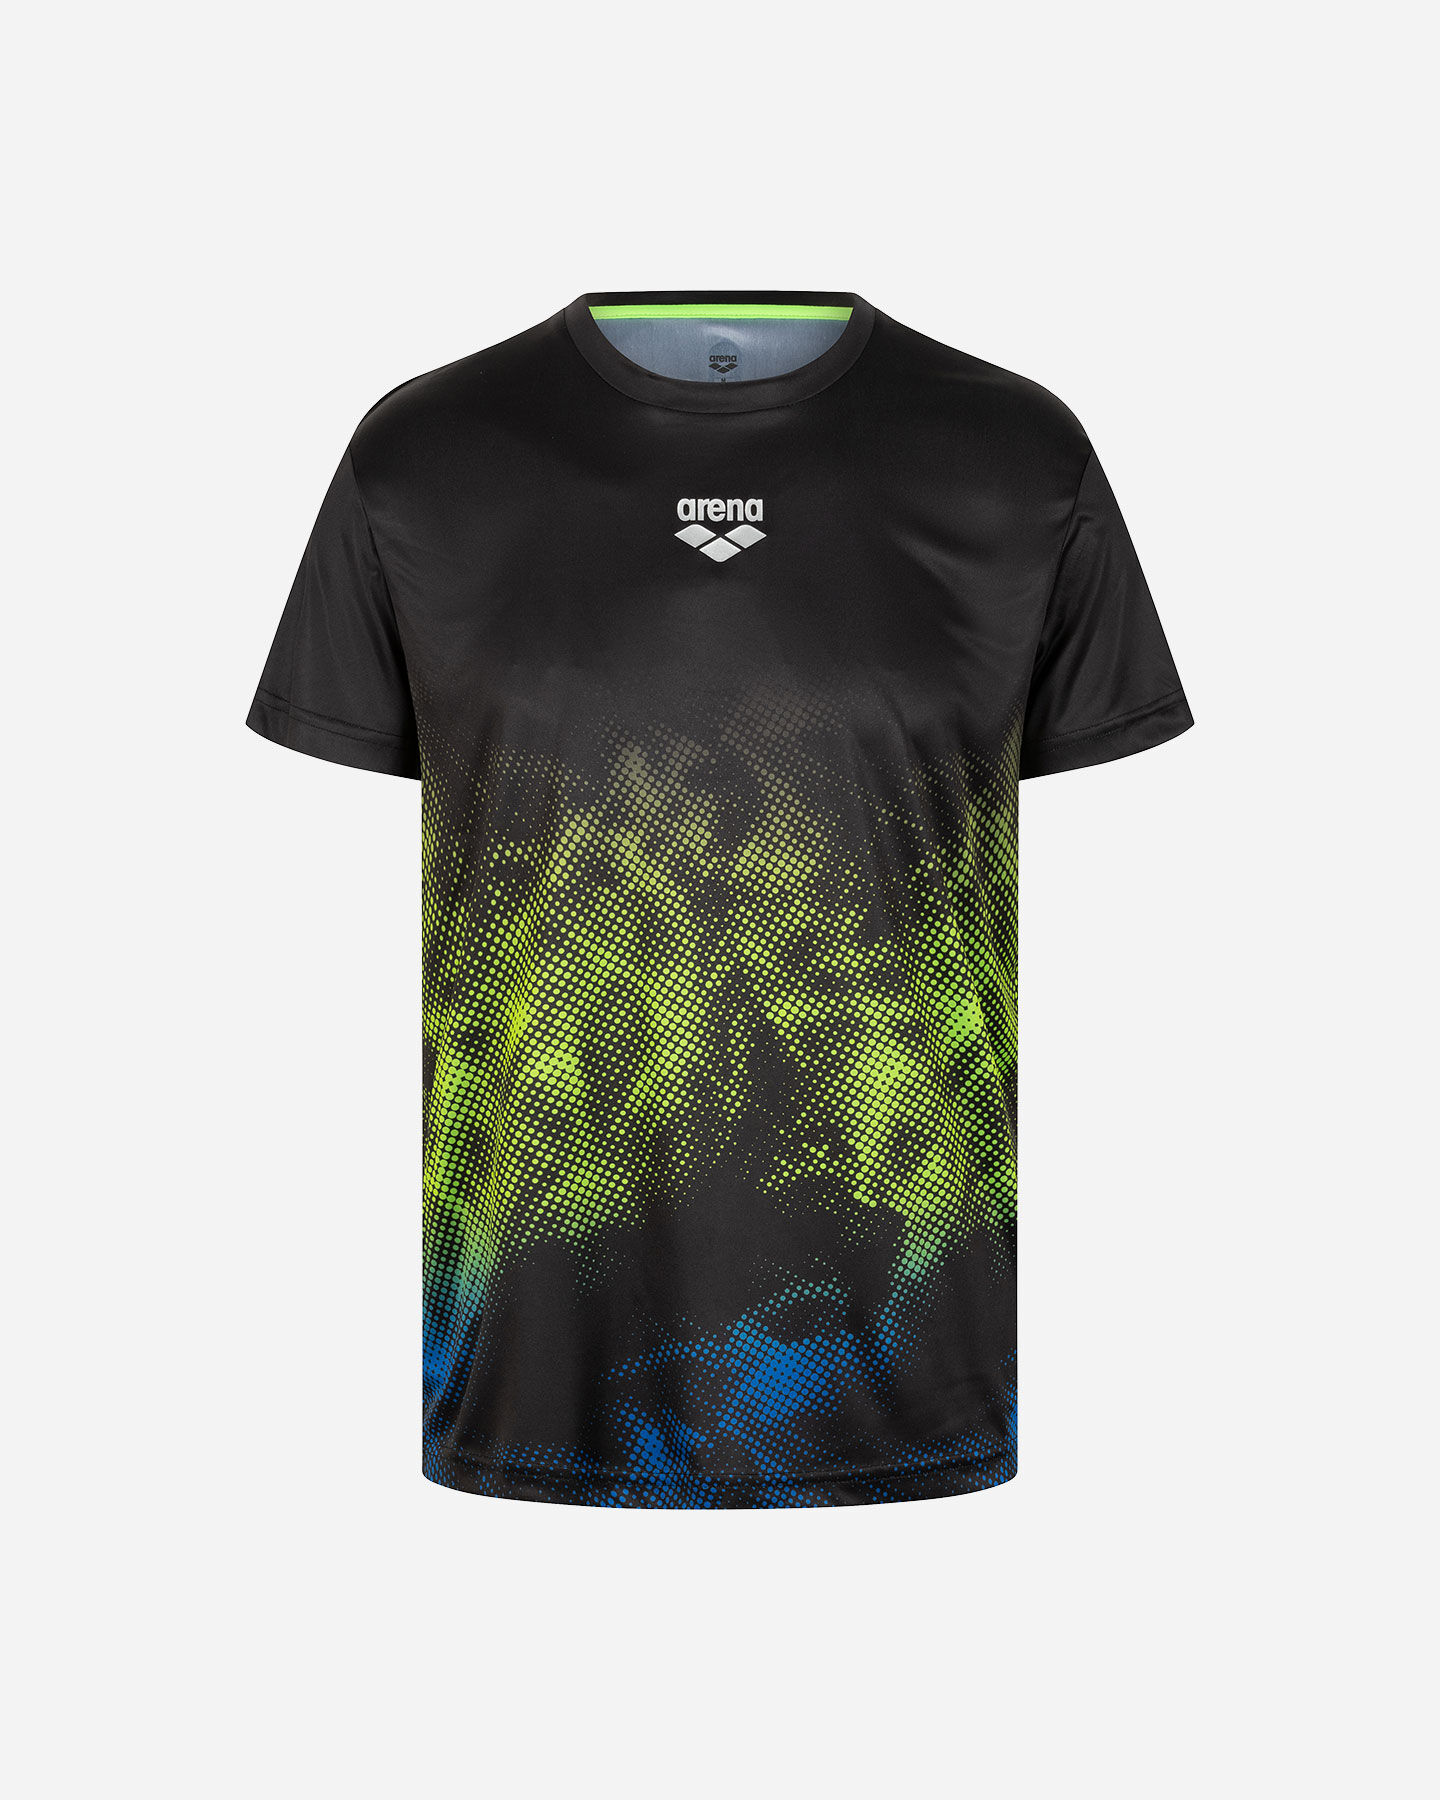  T-Shirt running ARENA AMBITION M S4131046|050|S scatto 0